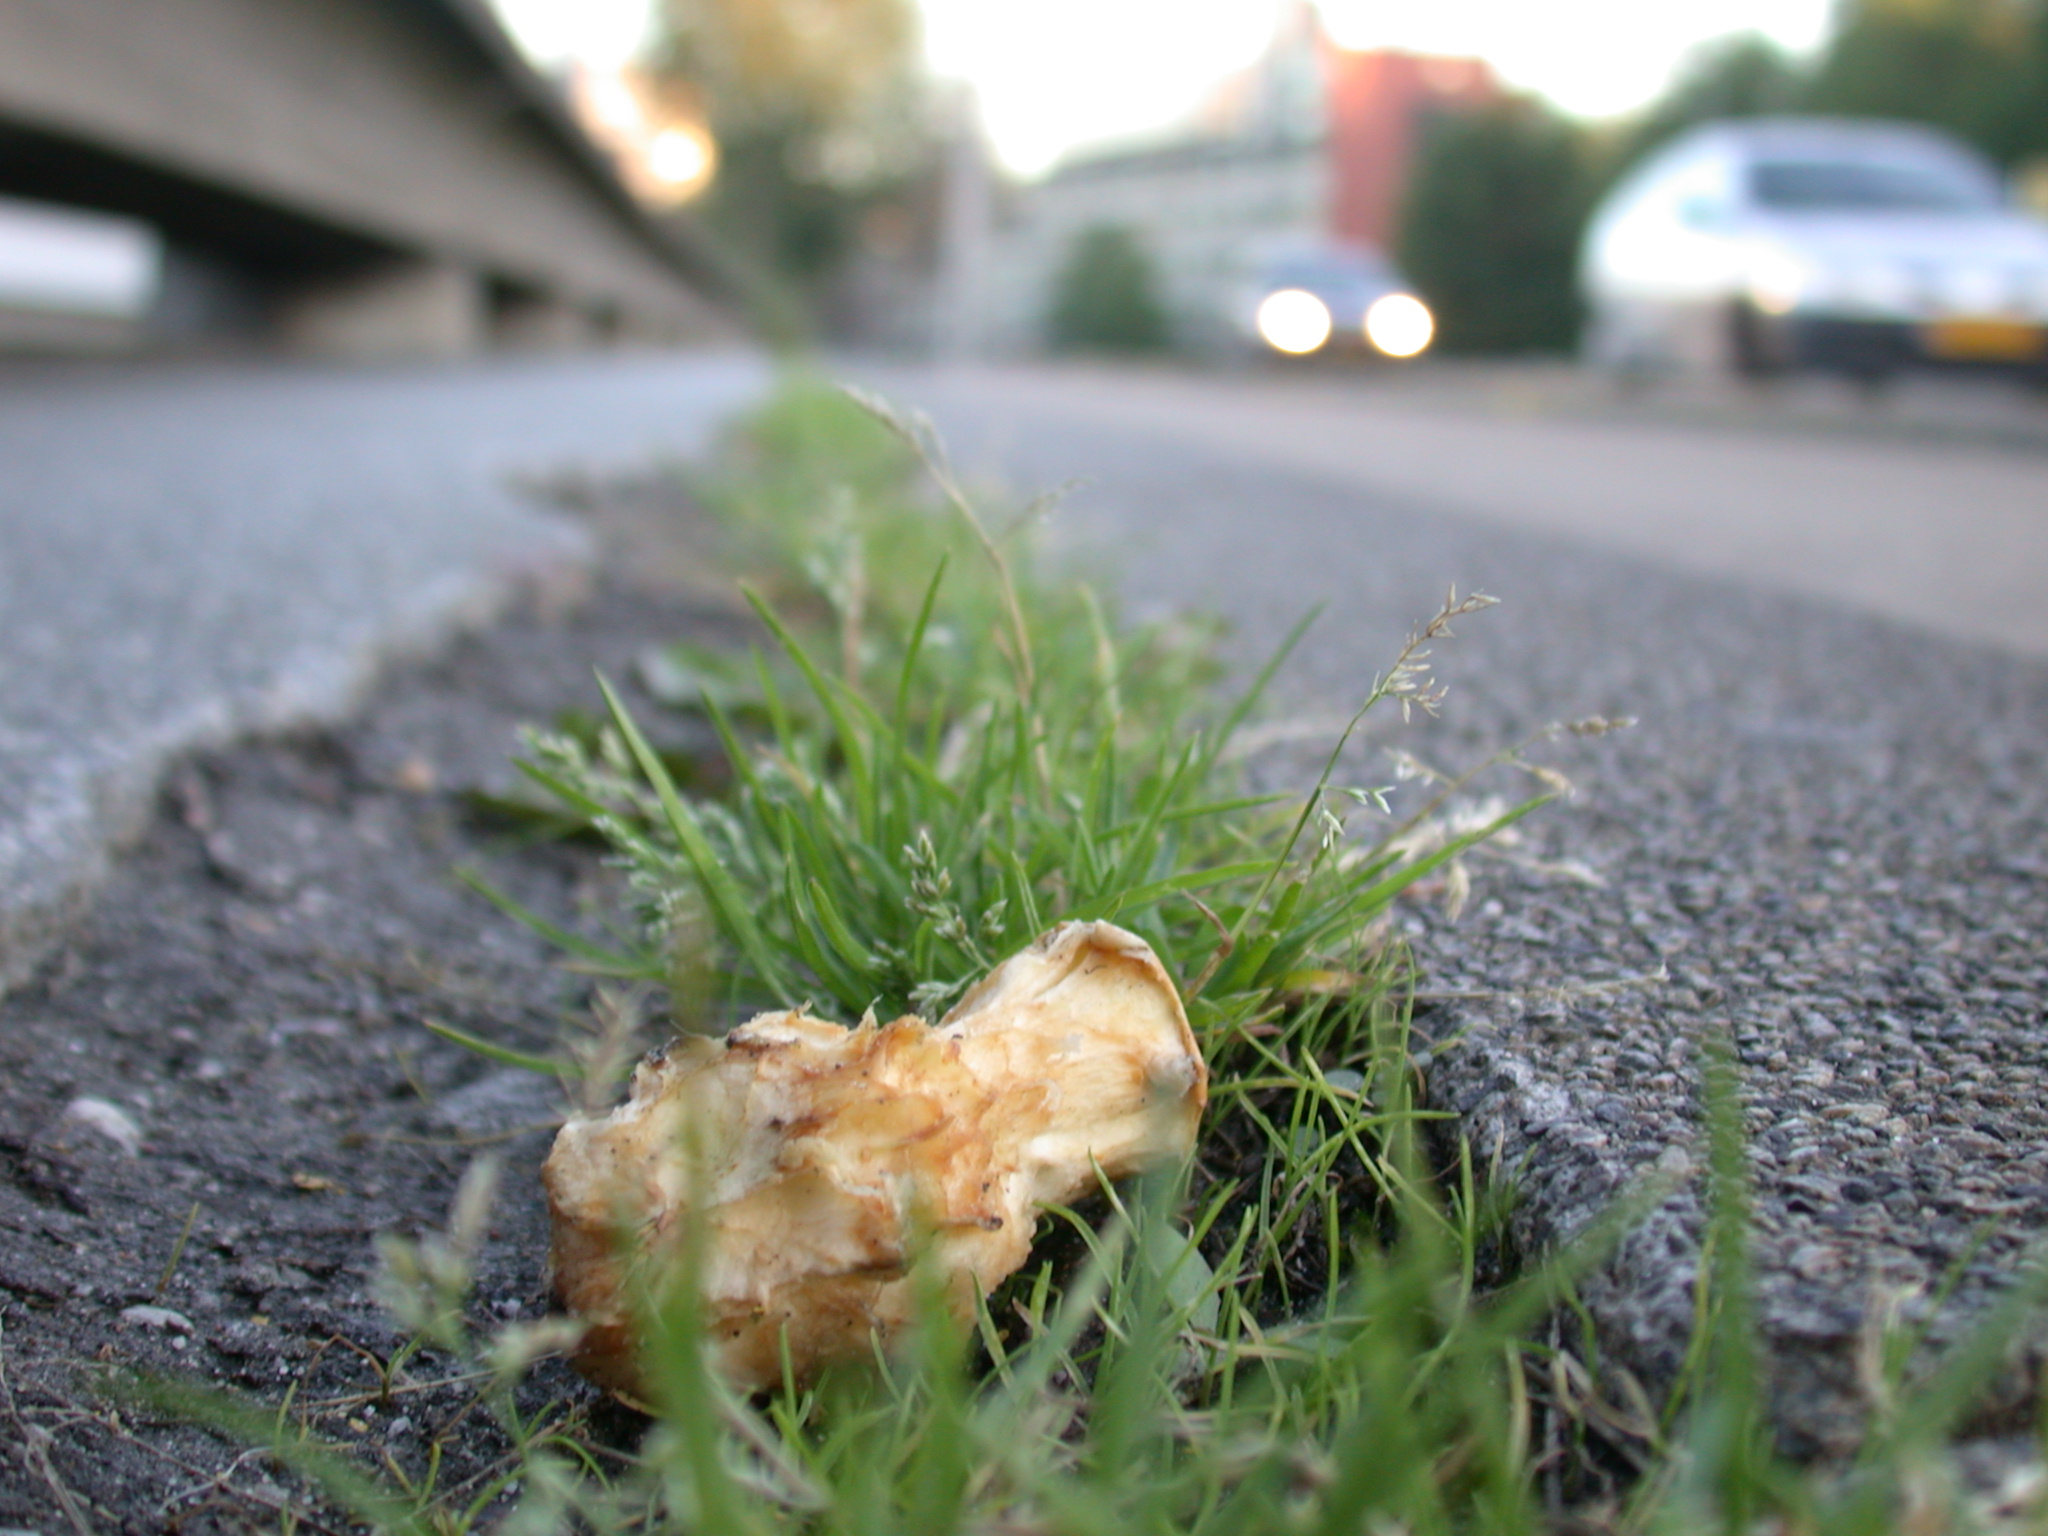 rotten apple in the side of the road street tarmac grass free